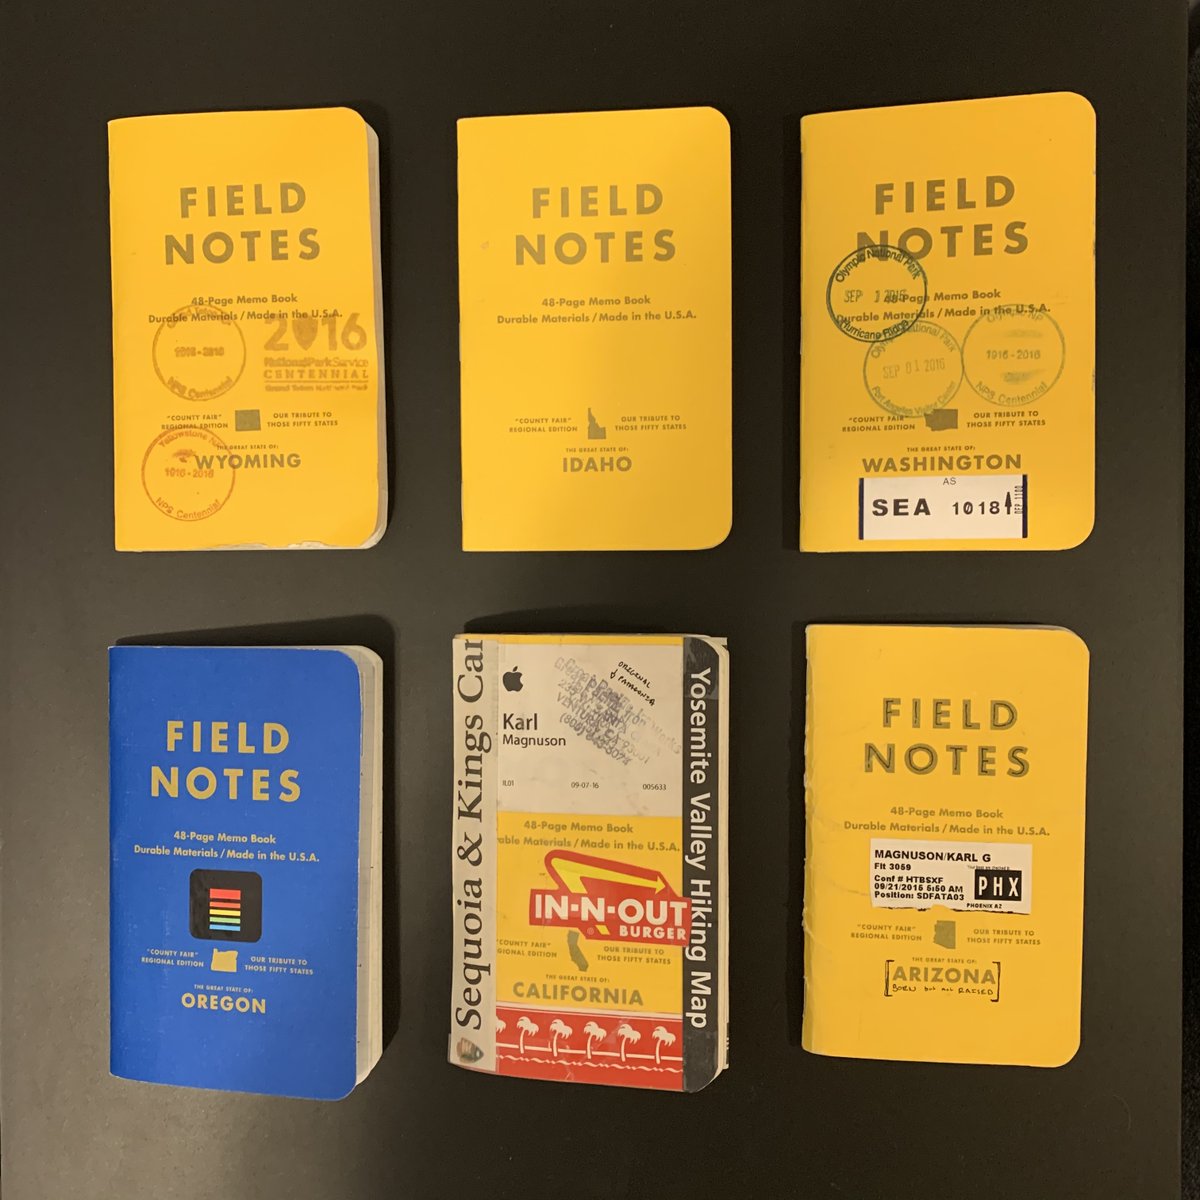 From CA to AZ (remember this was all from that one set of FN! A lot of ground to cover!) I typically take a picture of each CF  @FieldNotesBrand notebook in the state - here's AZ for an example.  https://www.instagram.com/p/BL467h9DWwz/ 